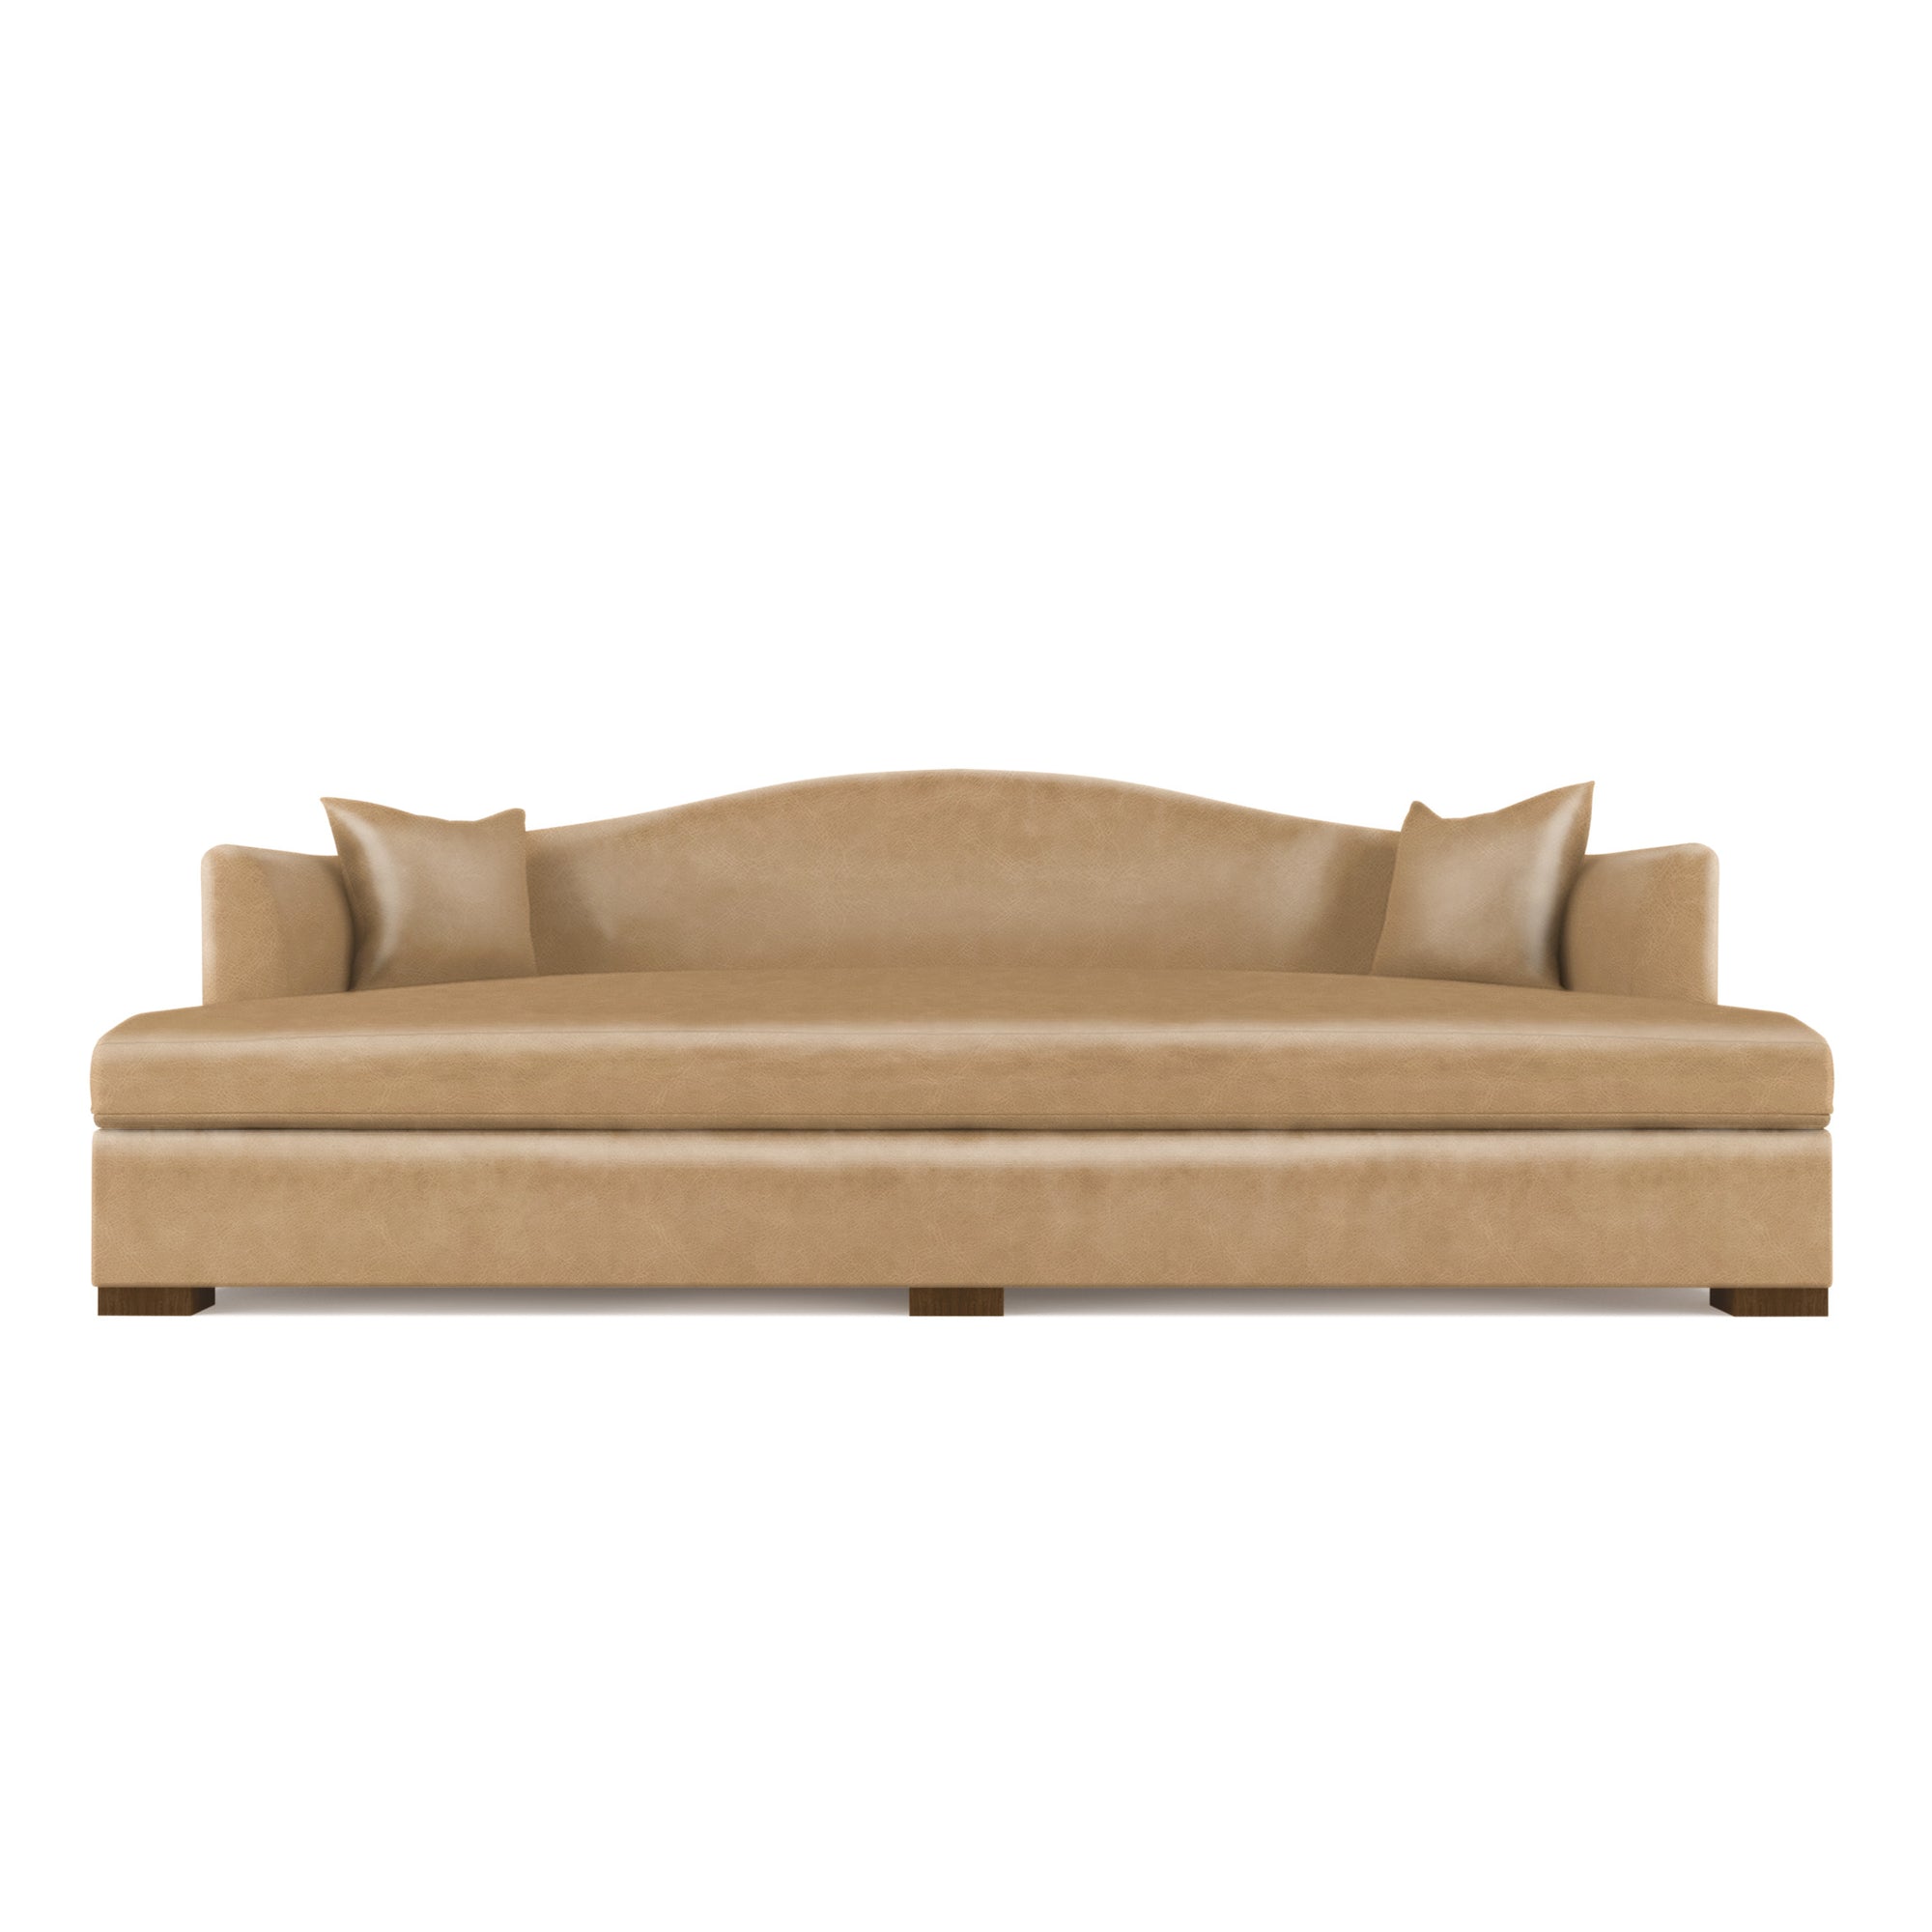 Horatio Daybed - Marzipan Vintage Leather